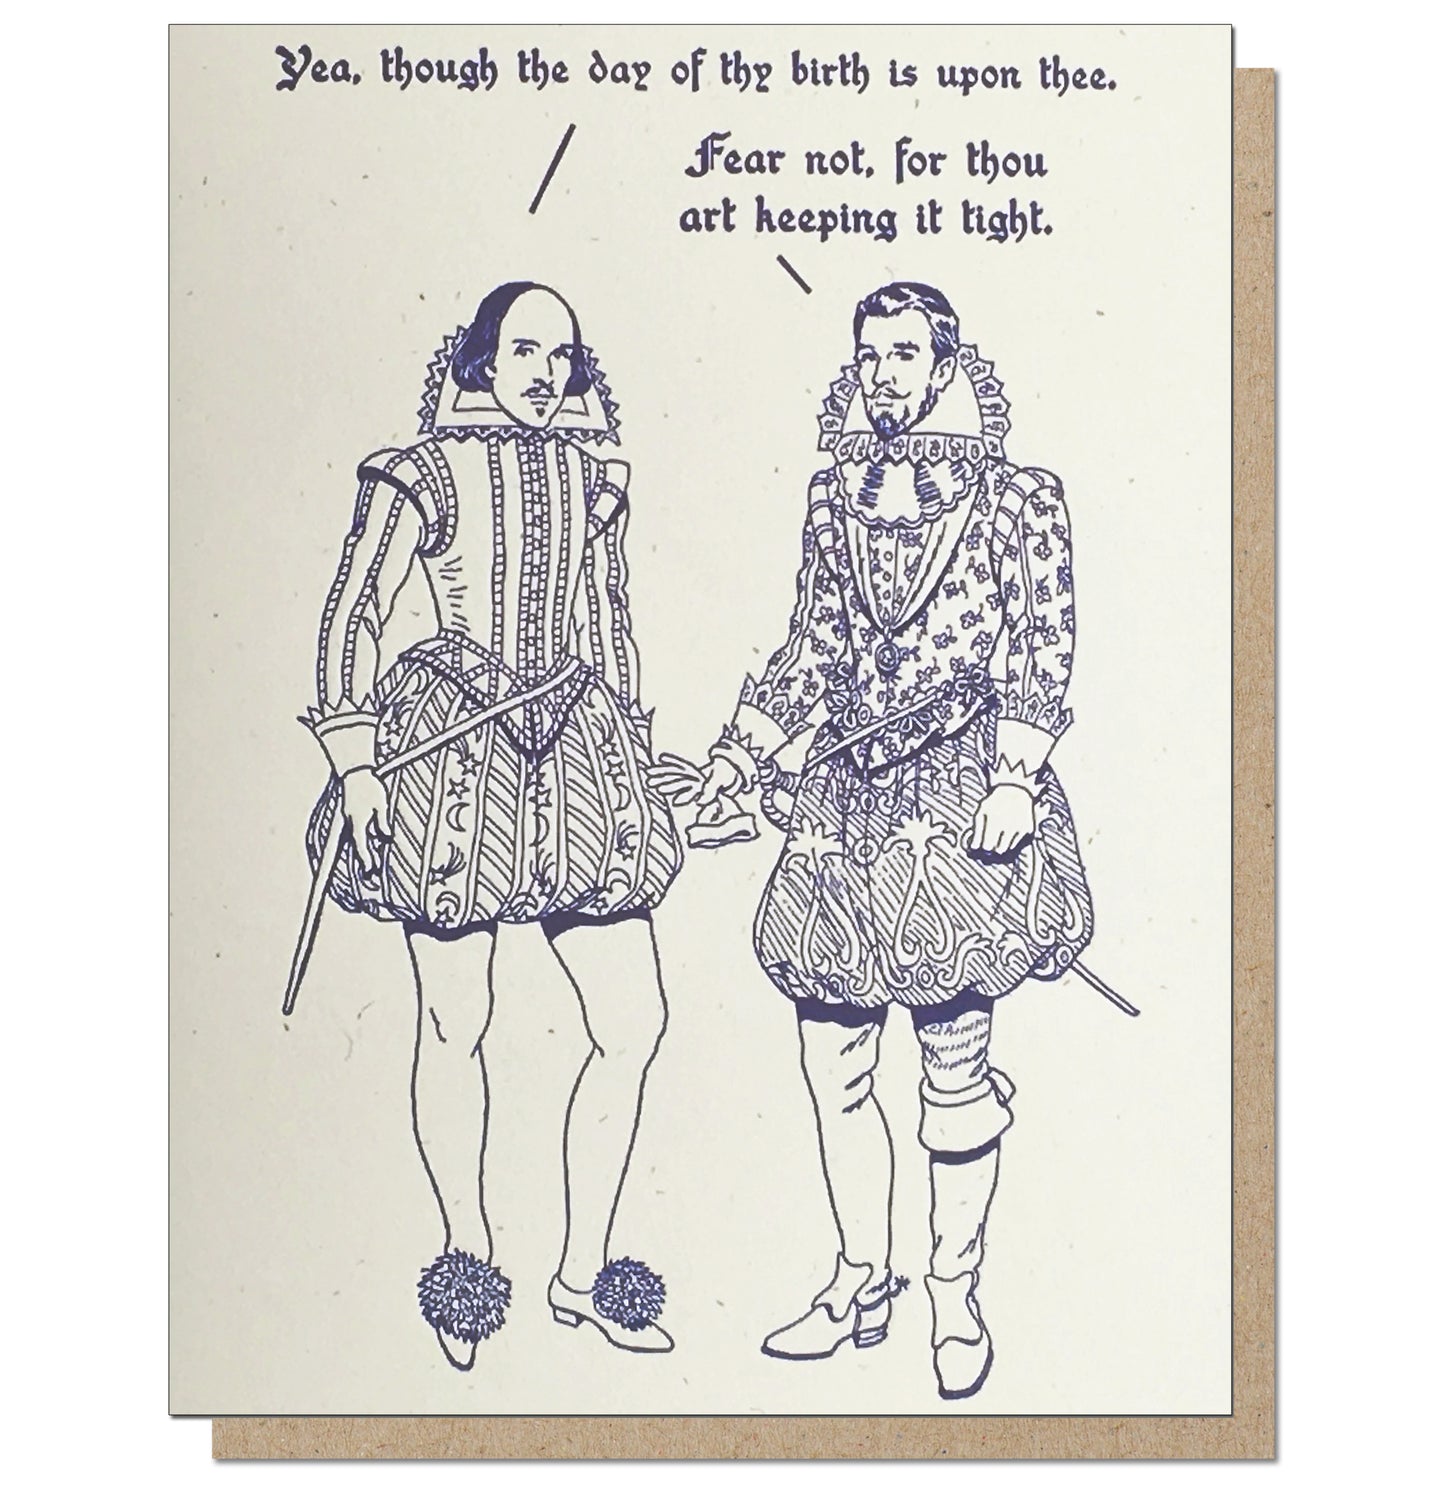 Britches and Hose: Keeping It Tight. Shakespeare Letterpress Birthday Greeting Card.